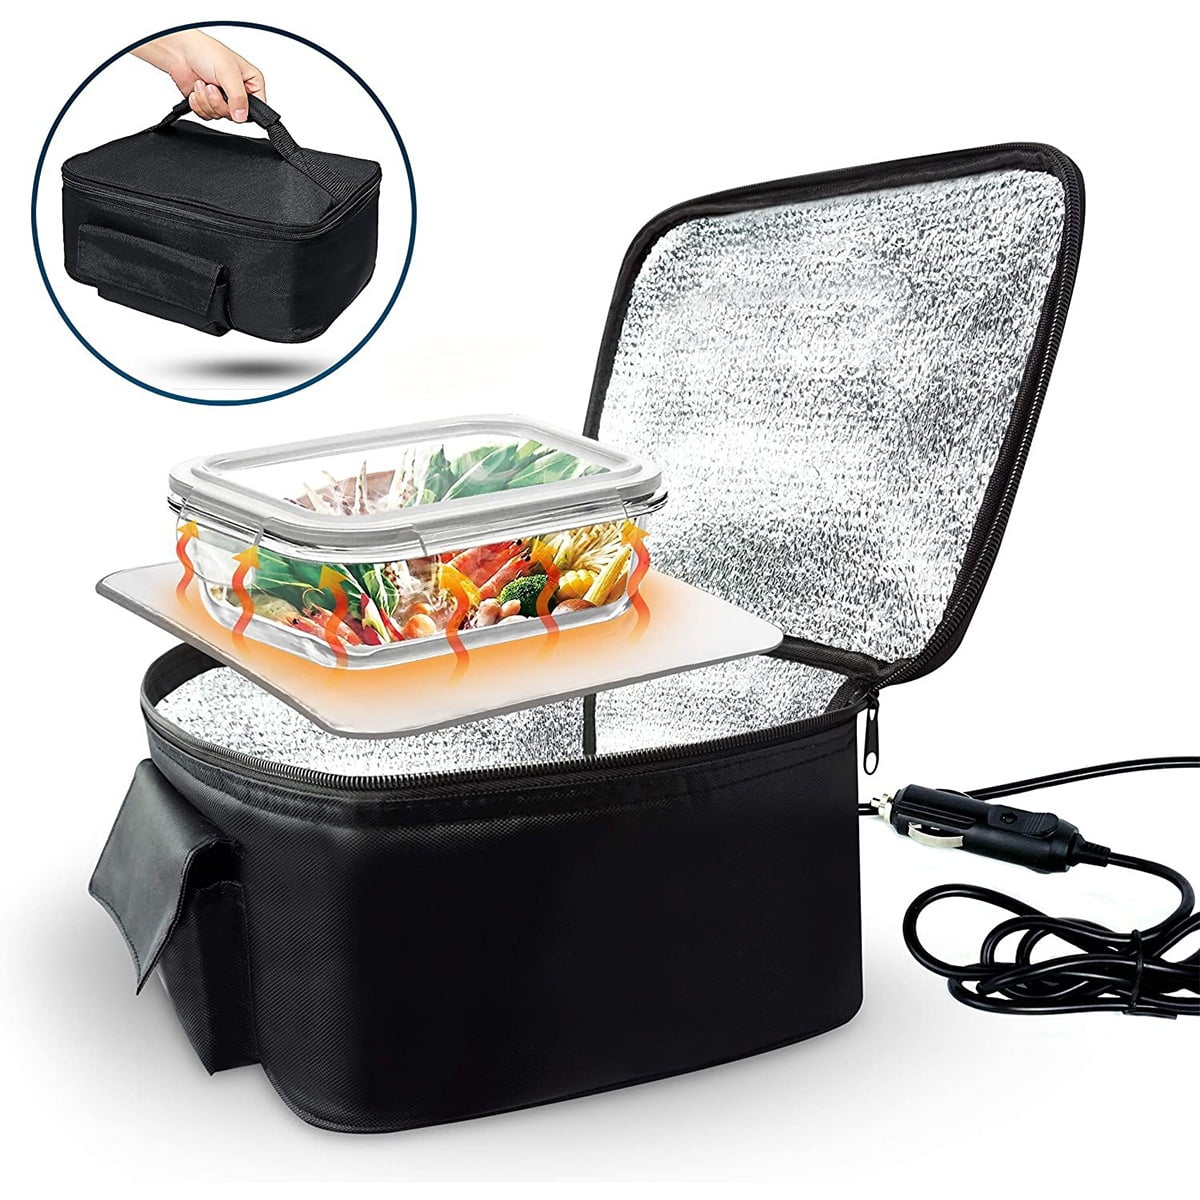 Portable Electric Heated Heating Lunch Box 12V Car Mini Microwave Oven Lunch Bag 